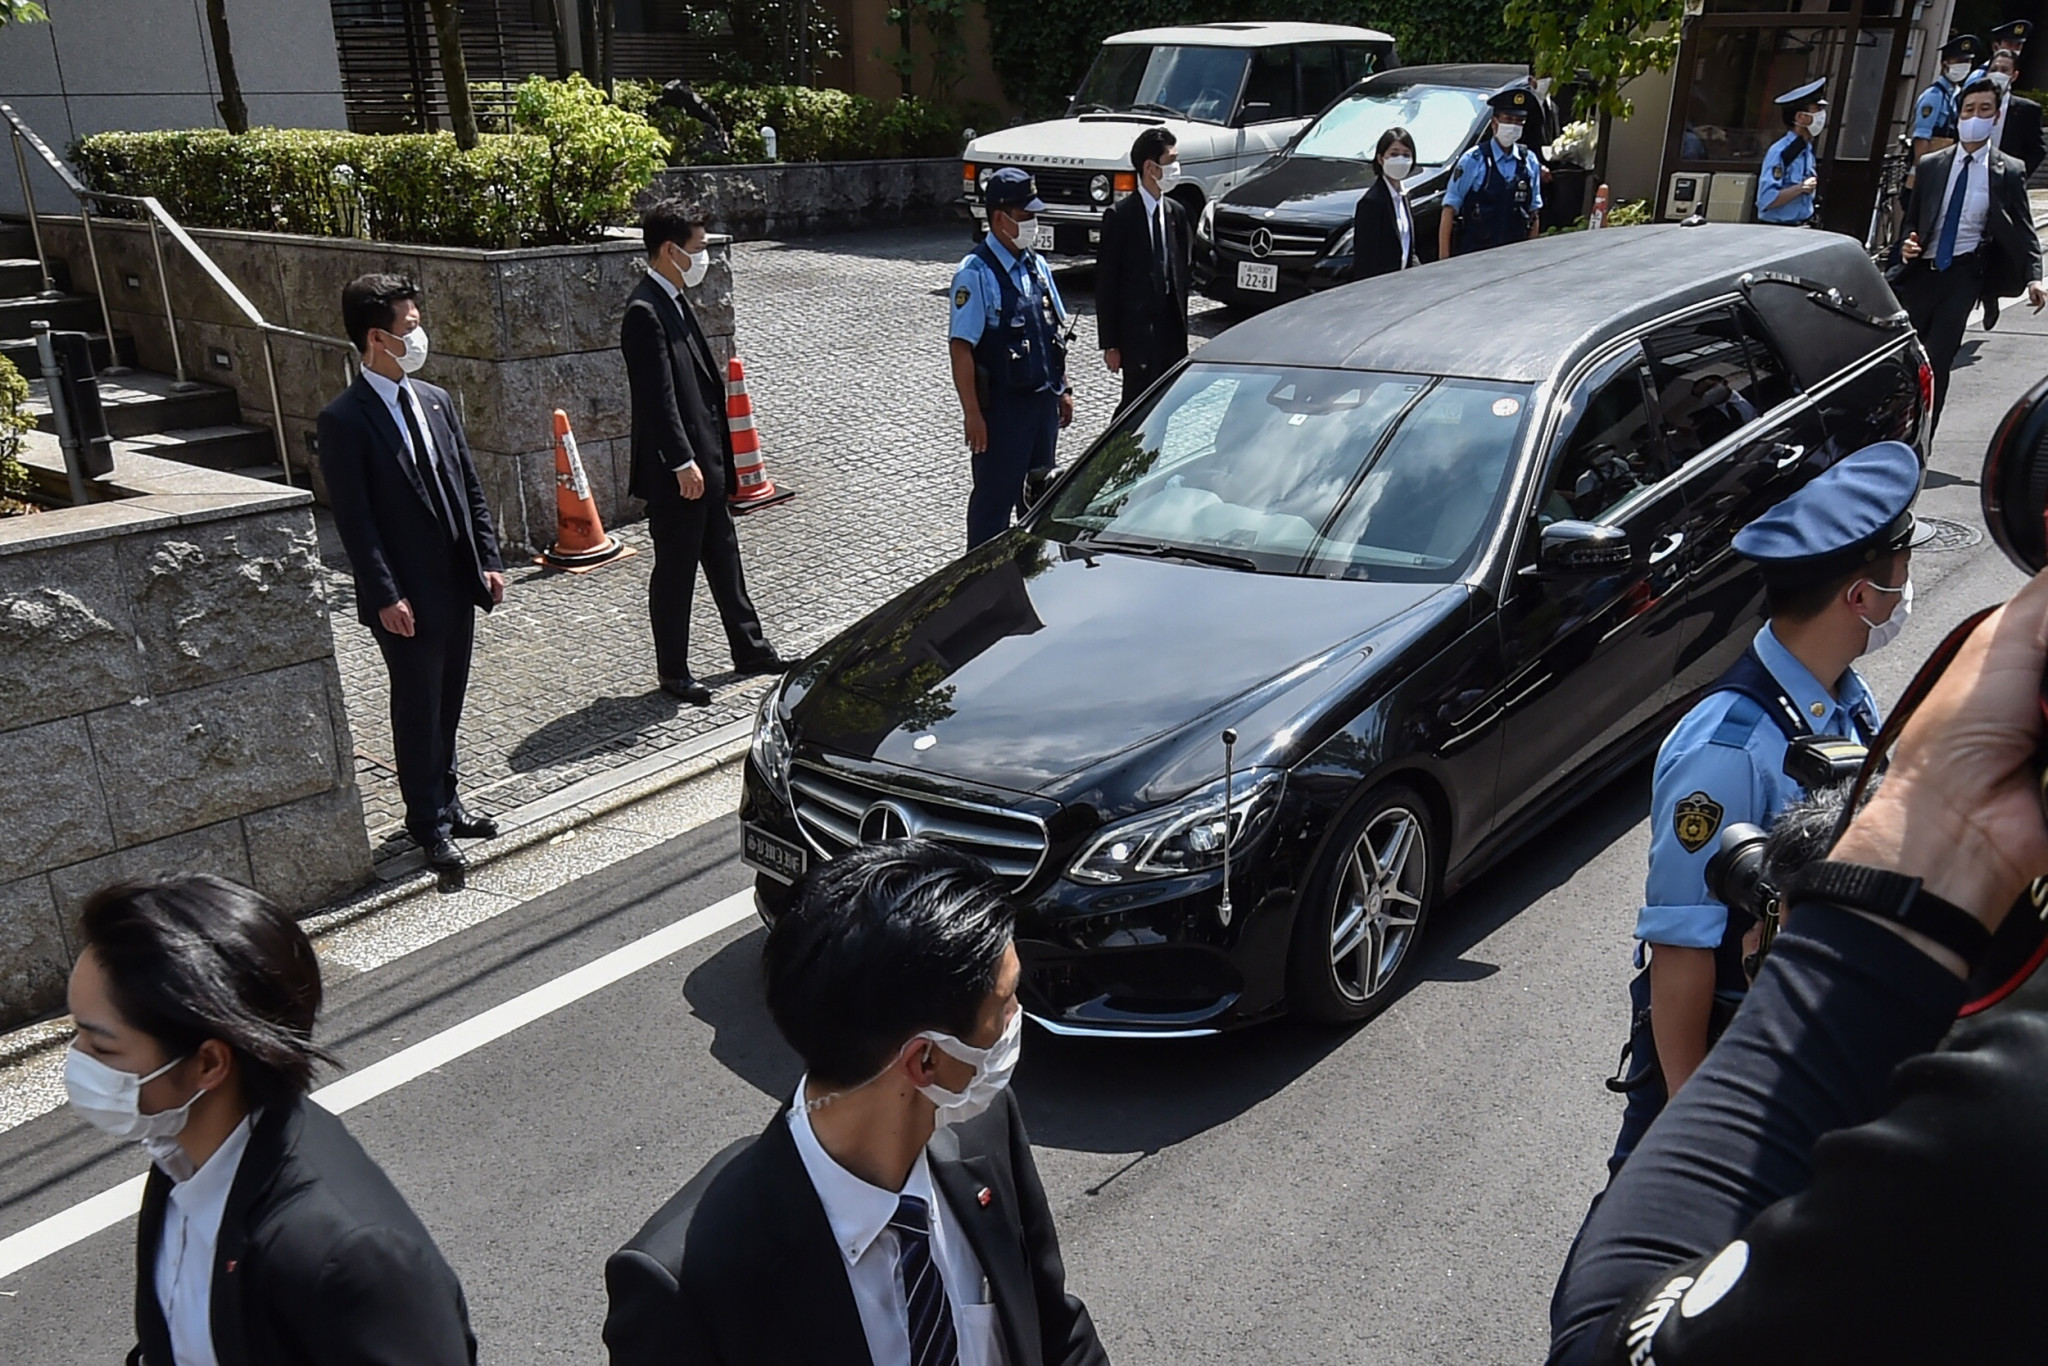 A hearse transporting the body of former Japanese Prime Minister Shinzō Abe arrives at his residence in Tokyo ©Getty Images